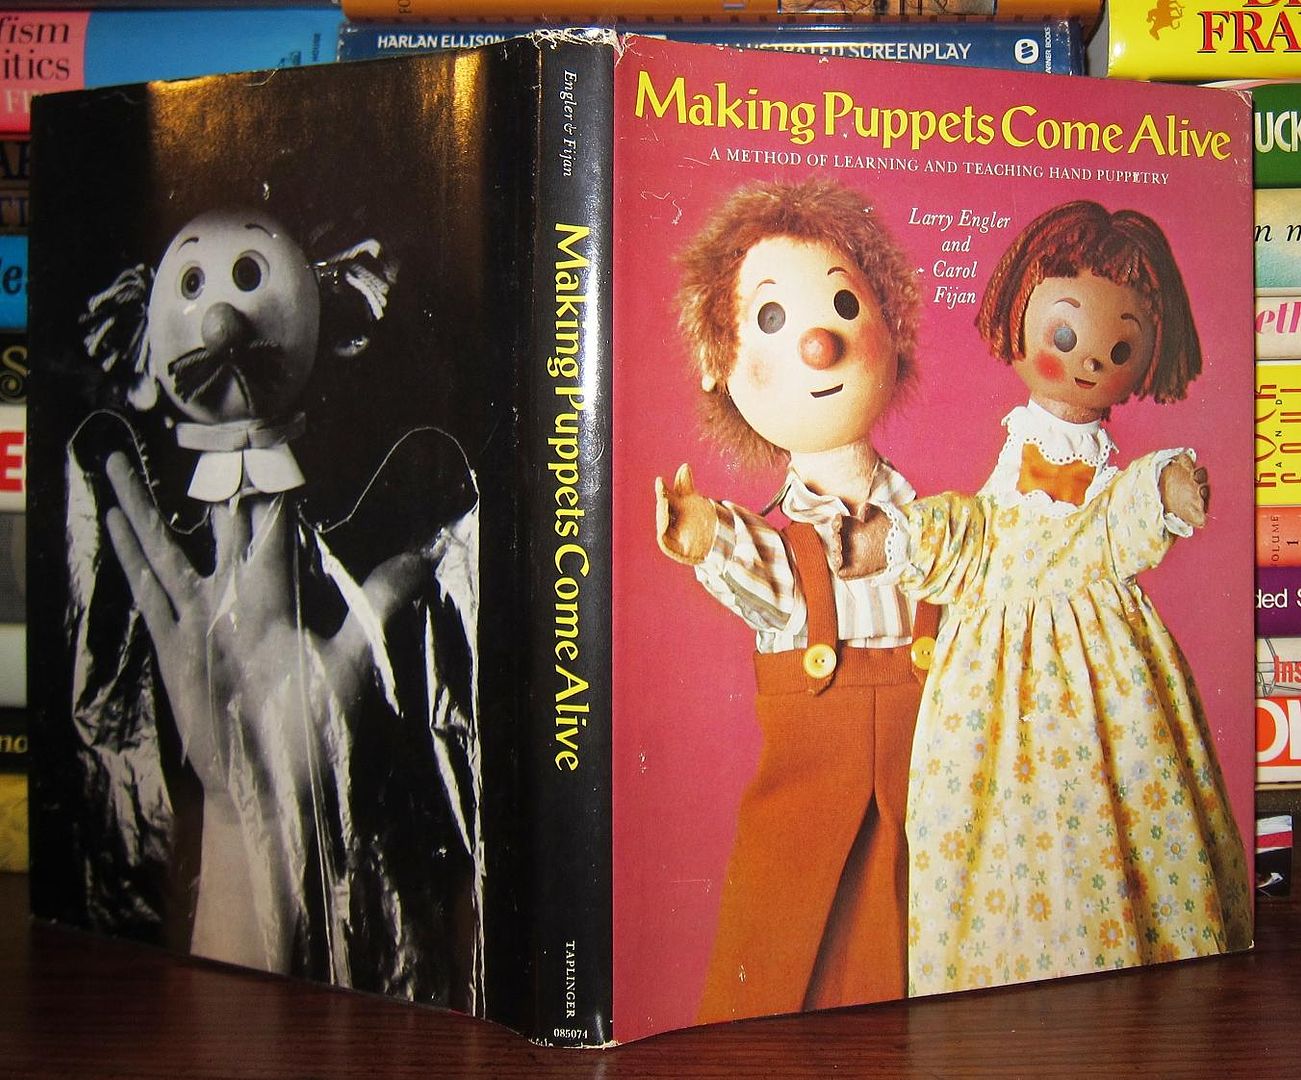 ENGLER, LARRY & CAROL FIJAN; ATTIE, DAVID & MOLLIE M. TORRAS - Making Puppets Come Alive a Method of Learning and Teaching Hand Puppetry